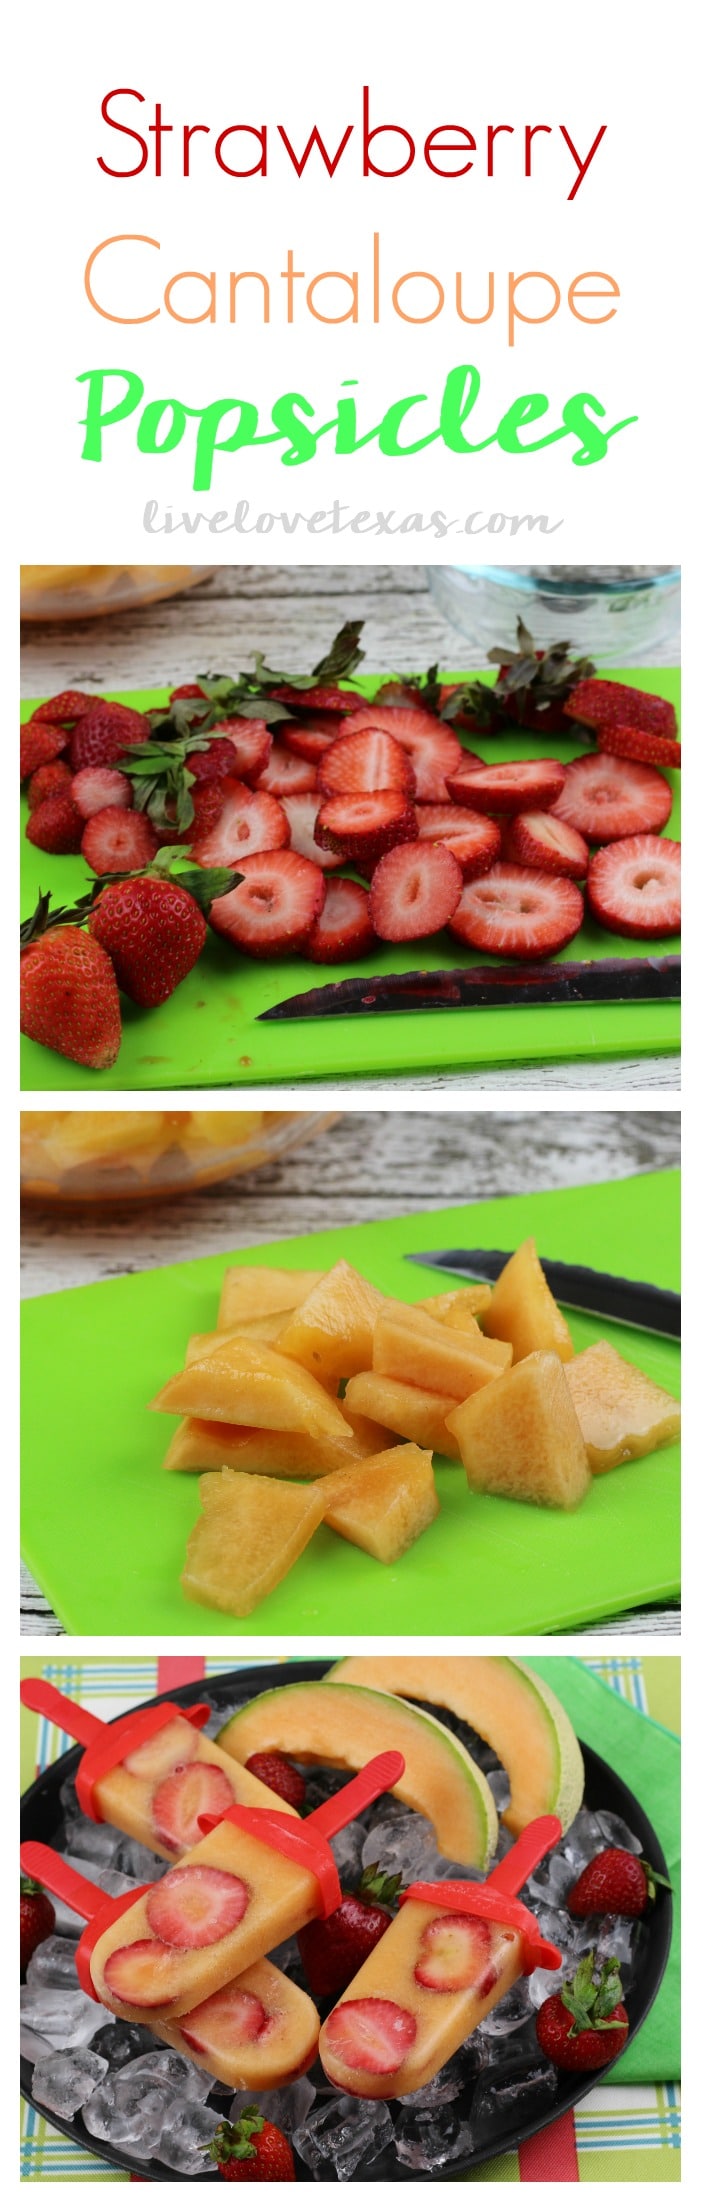 Summer is officially here! To cleebrate (and cool off just a bit), try making this easy homemade Strawberry Cantaloupe Popsicles recipe! This is such a great way to allow kids to help in the kitchen and enjoy a healthy snack afterwards! 